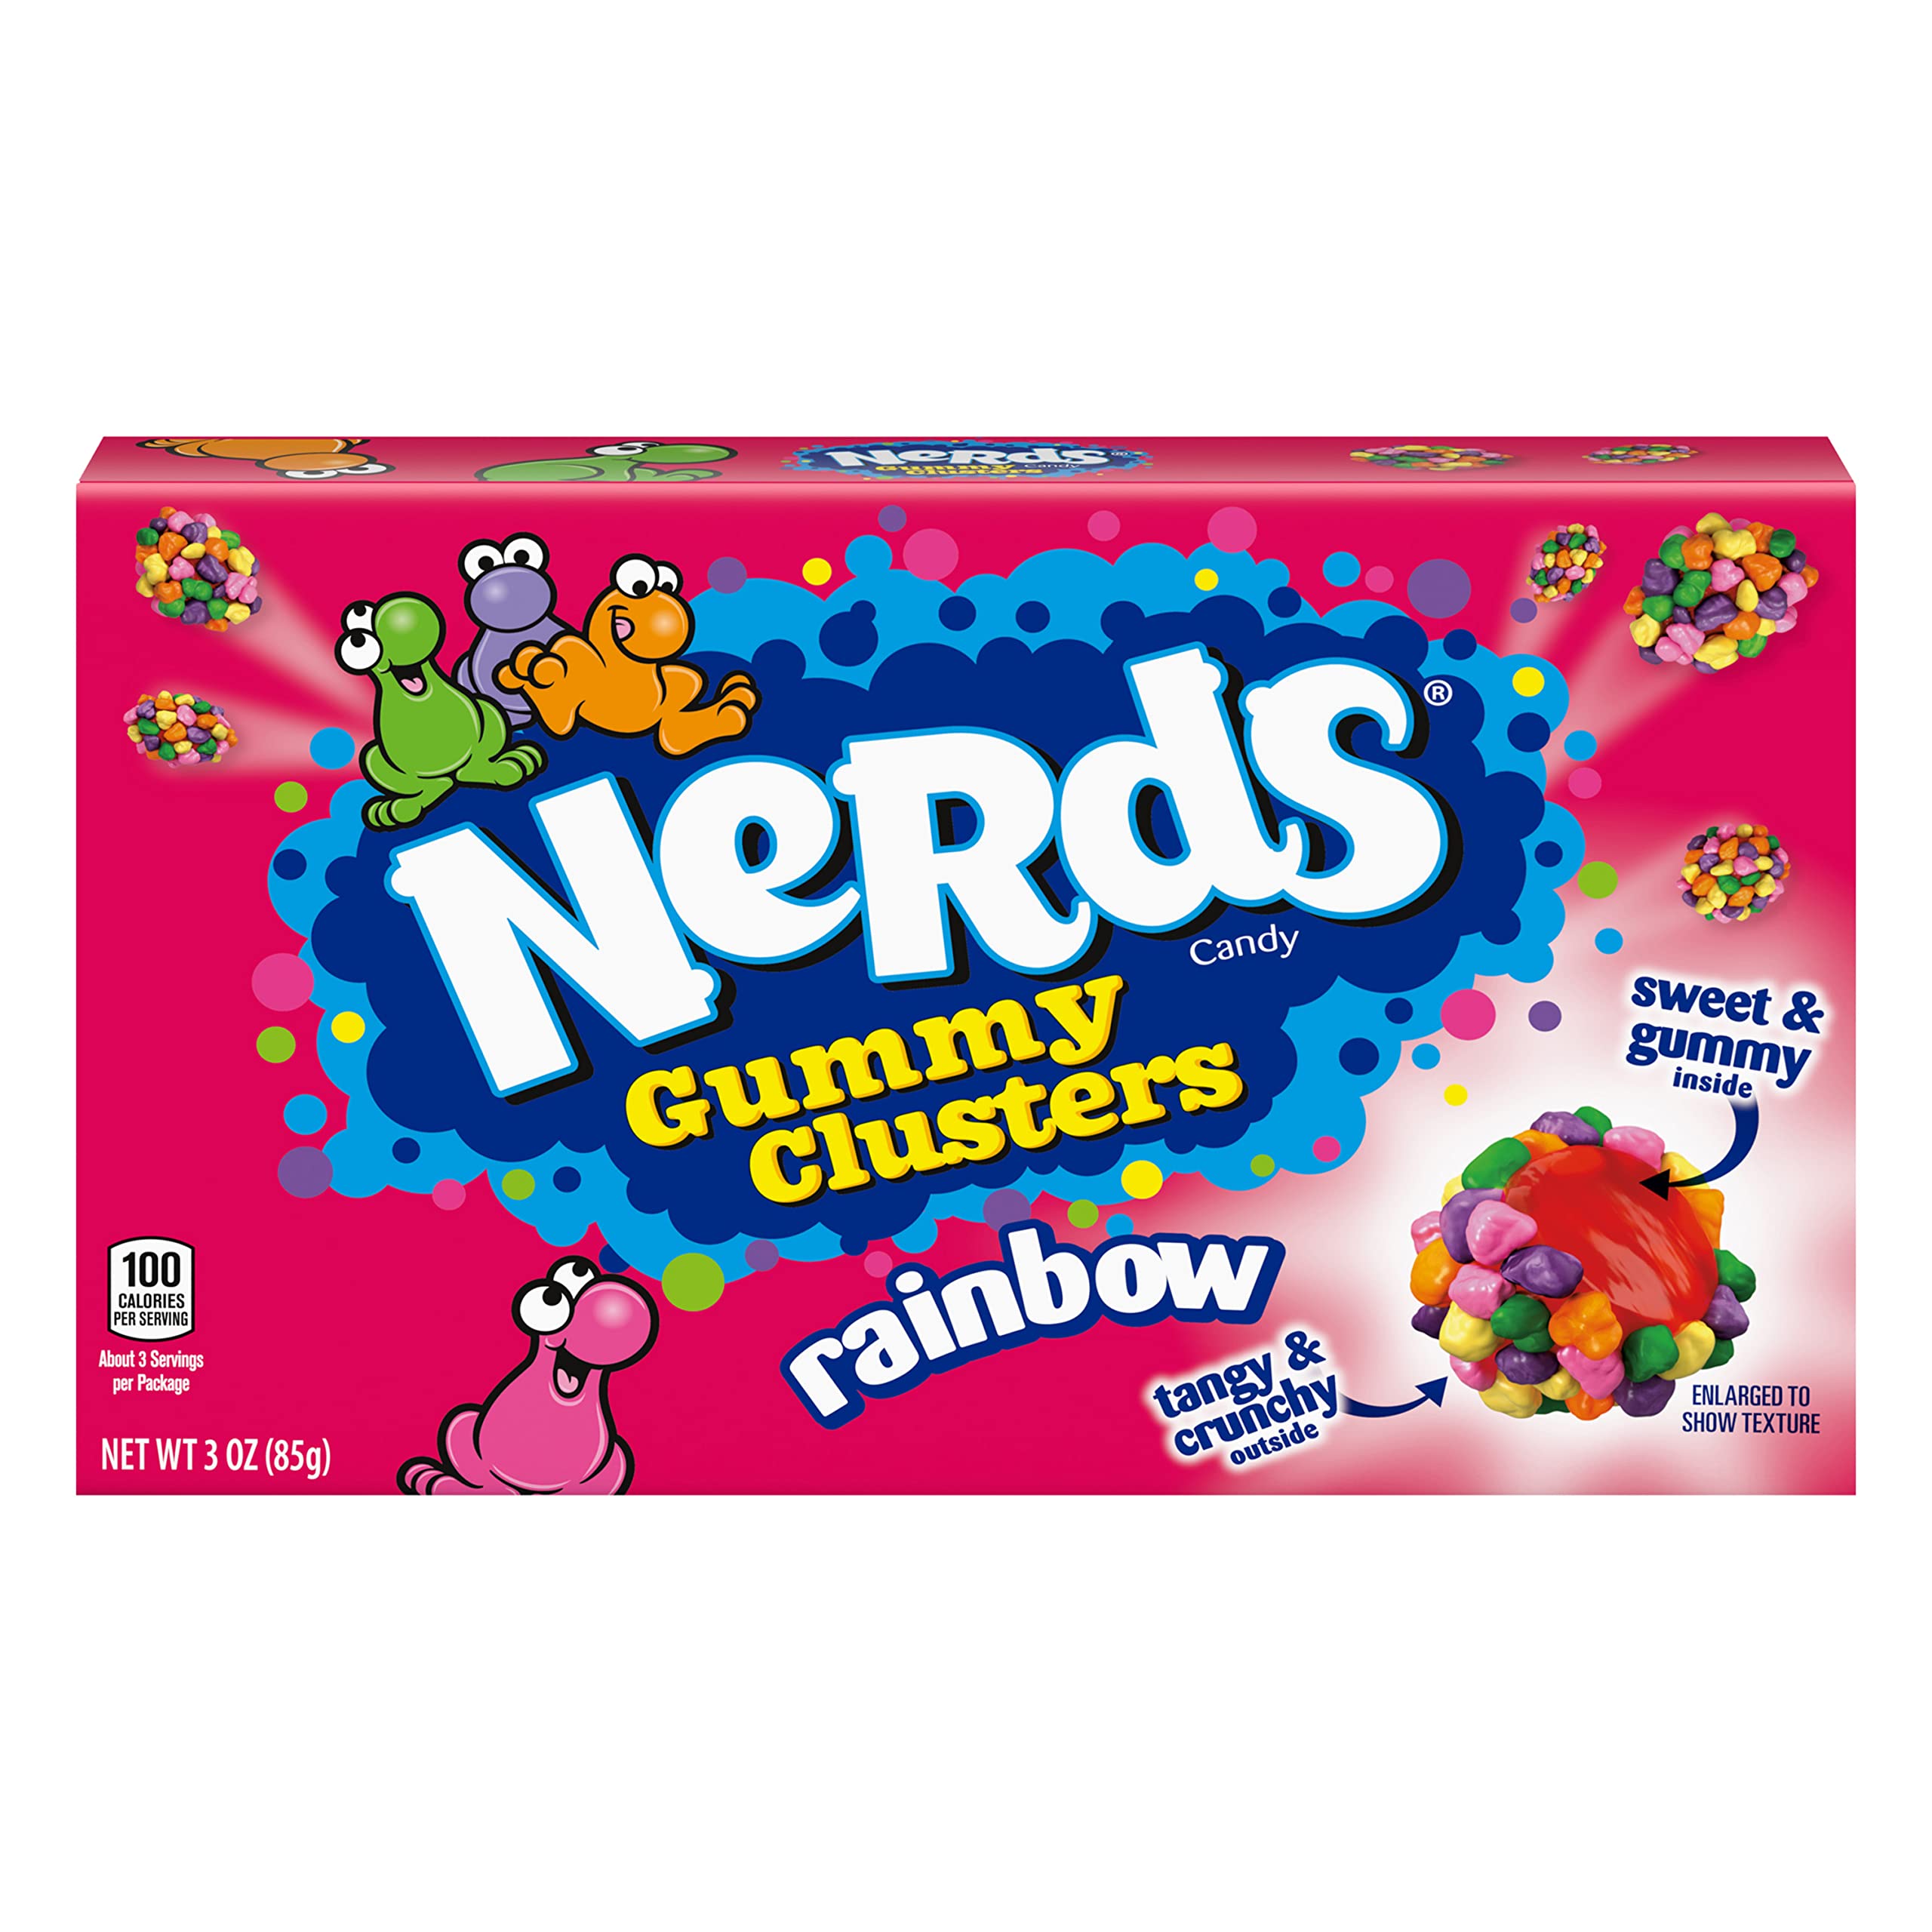 12-Pack 3-Oz Nerds Gummy Clusters Candy Movie Theater Box (Rainbow) $9.65 w/ S&S + Free S&H w/ Prime or $25+